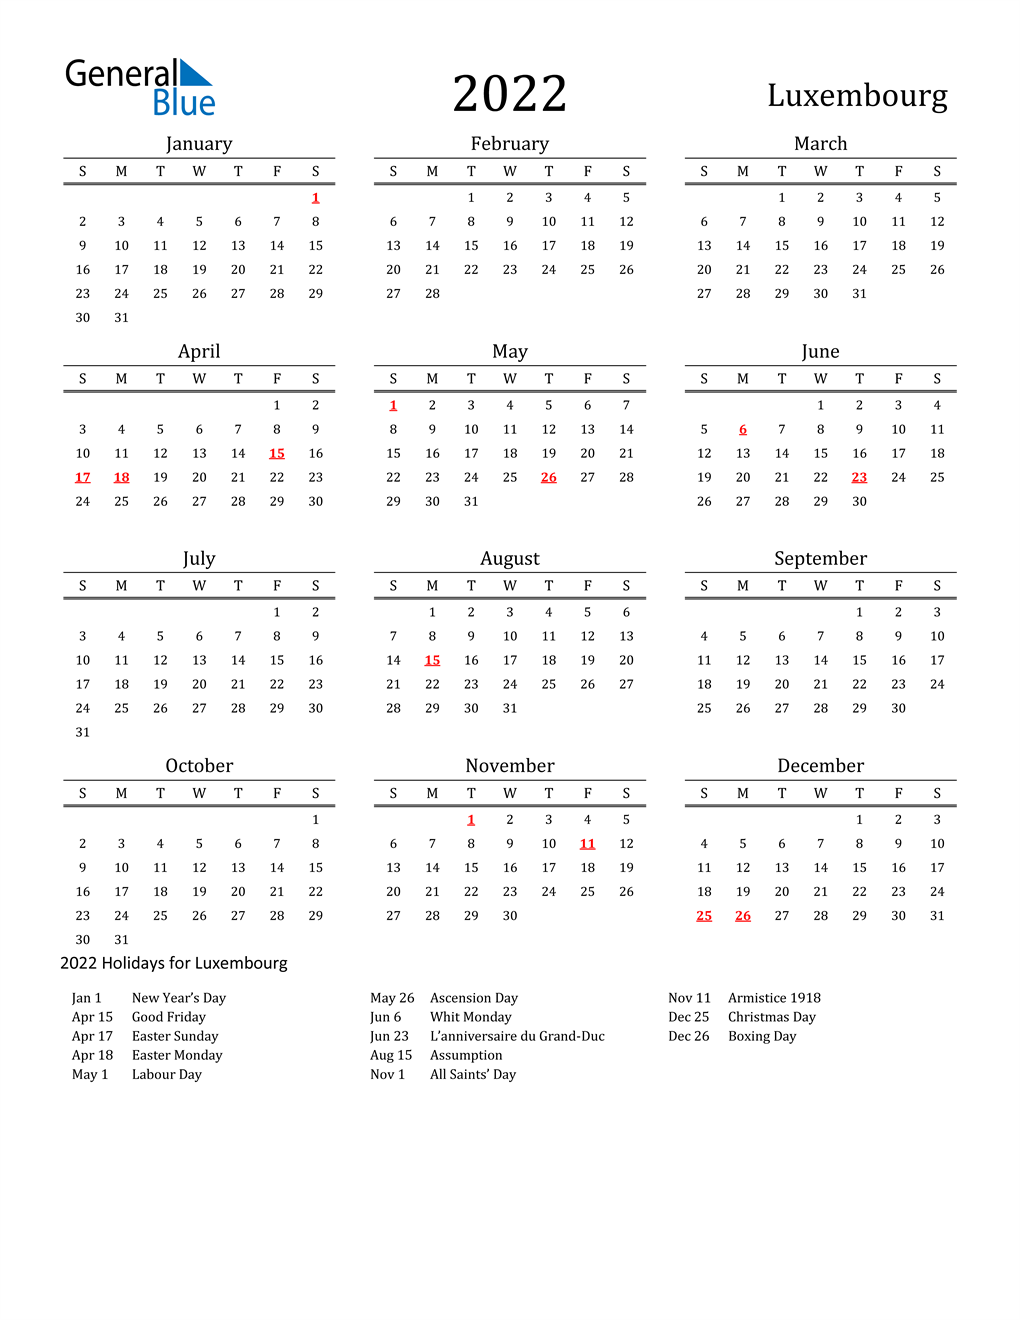 Holiday Calendar 2022 2022 Luxembourg Calendar With Holidays